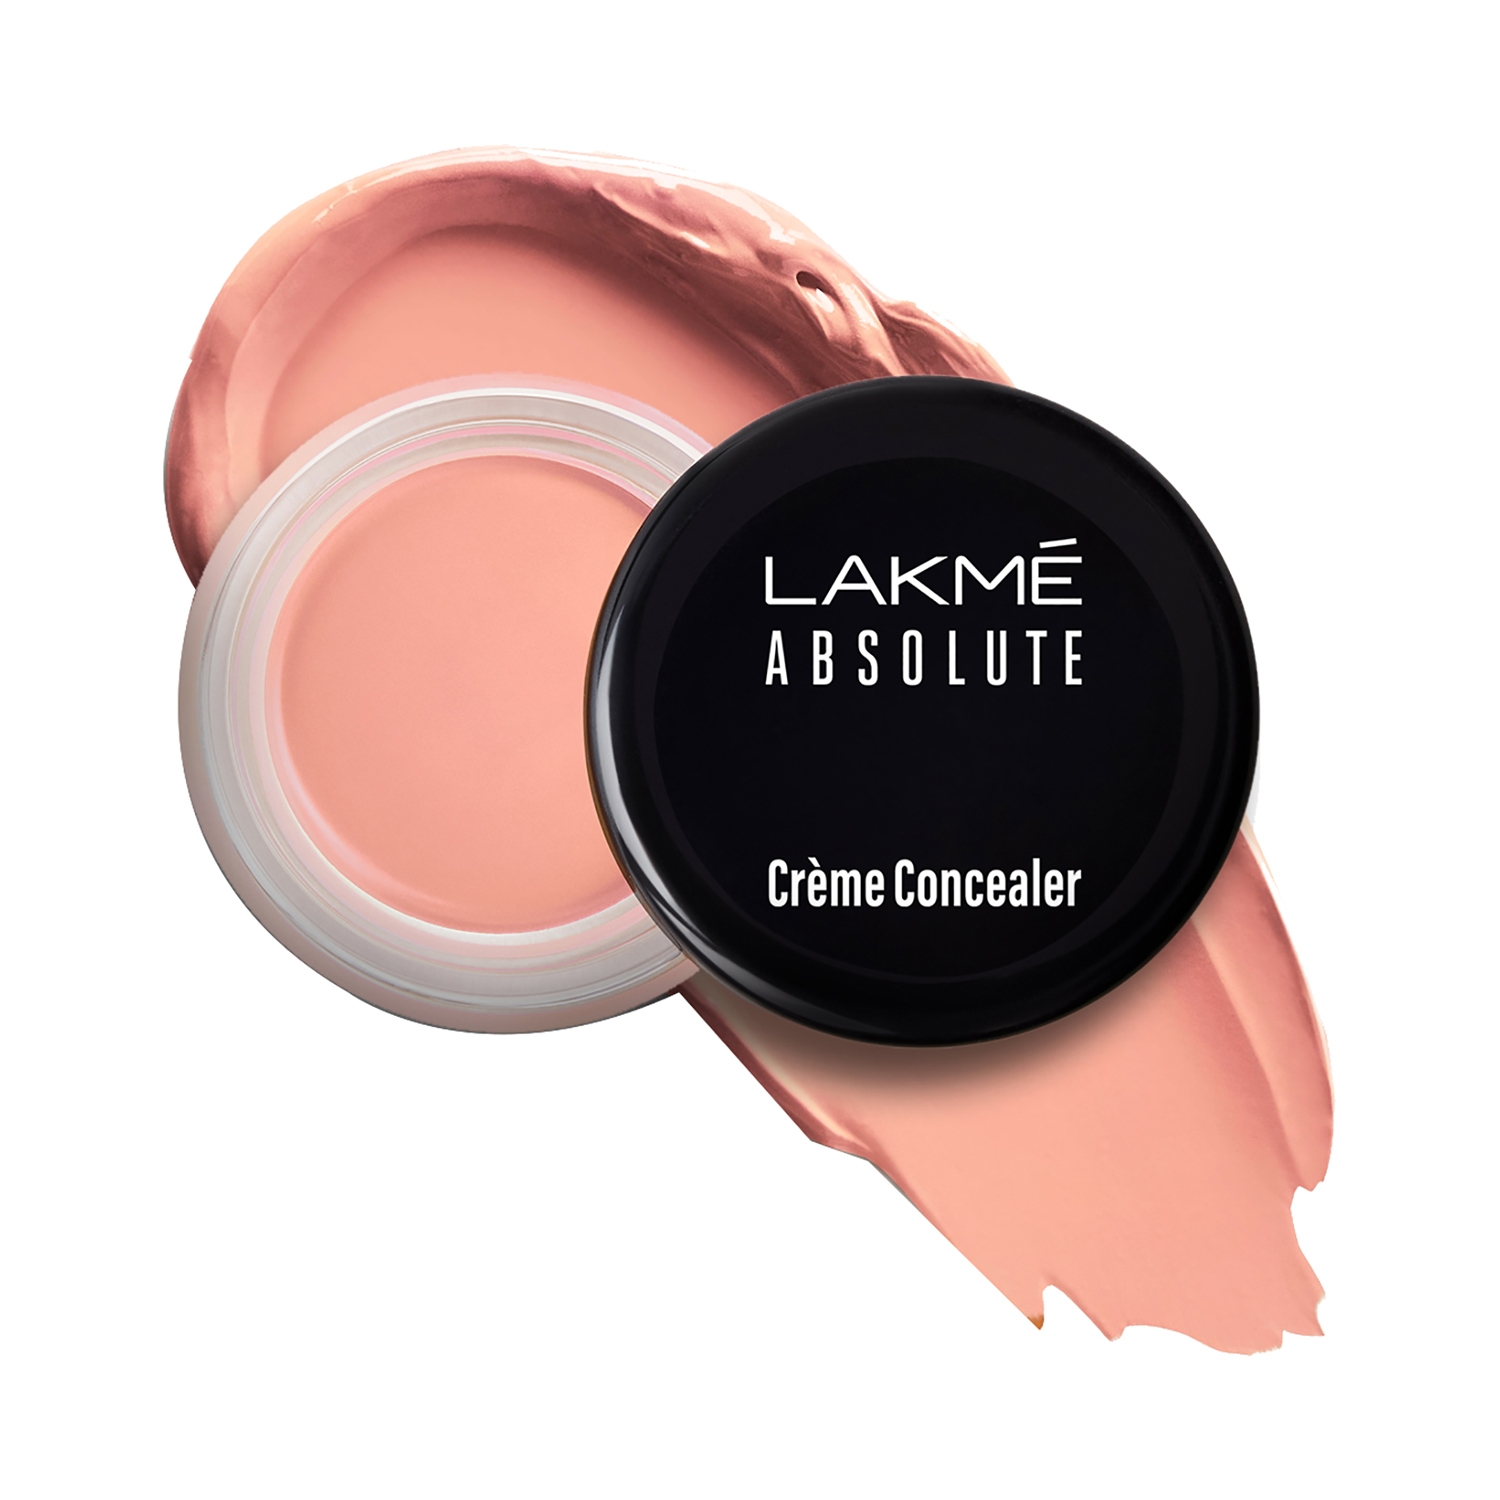 Lakme | Lakme Absolute Creme Concealer - 10 Ivory (3.9g)